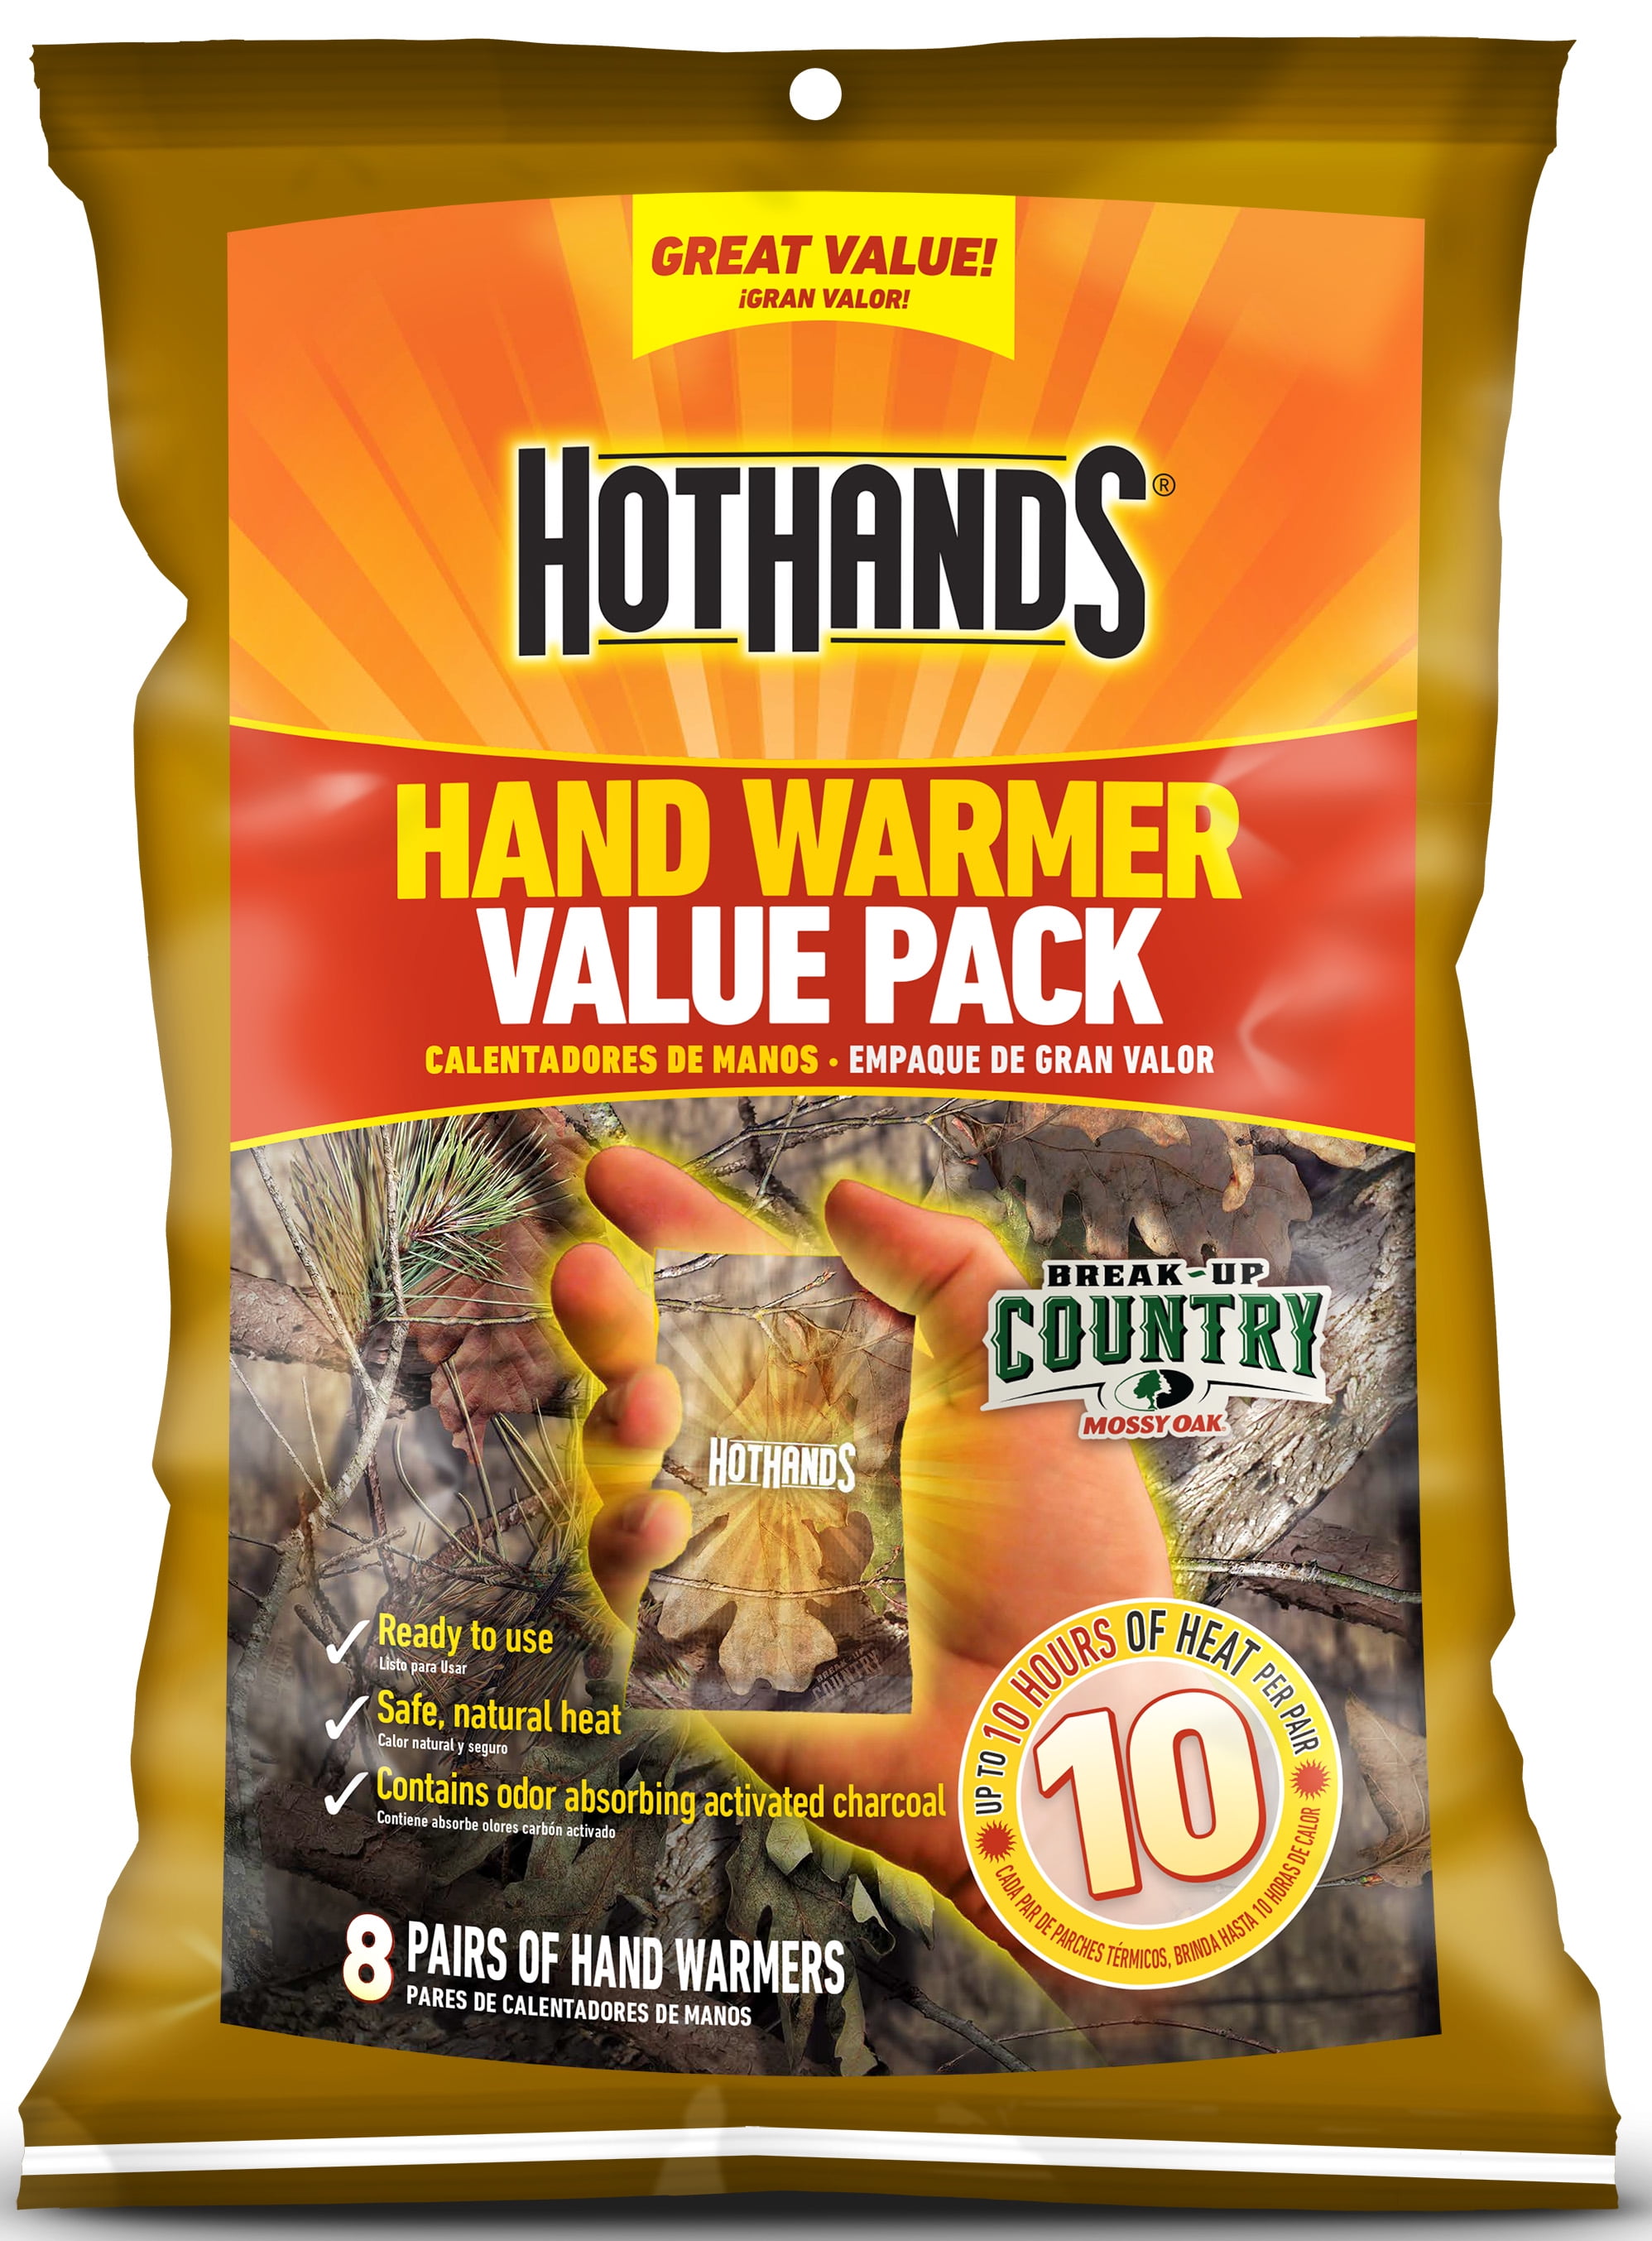 NEW Hot Hands Hand Warmers 24 Packs 2 Pair Per 48 Count lot 04/22 Hunting Winter 